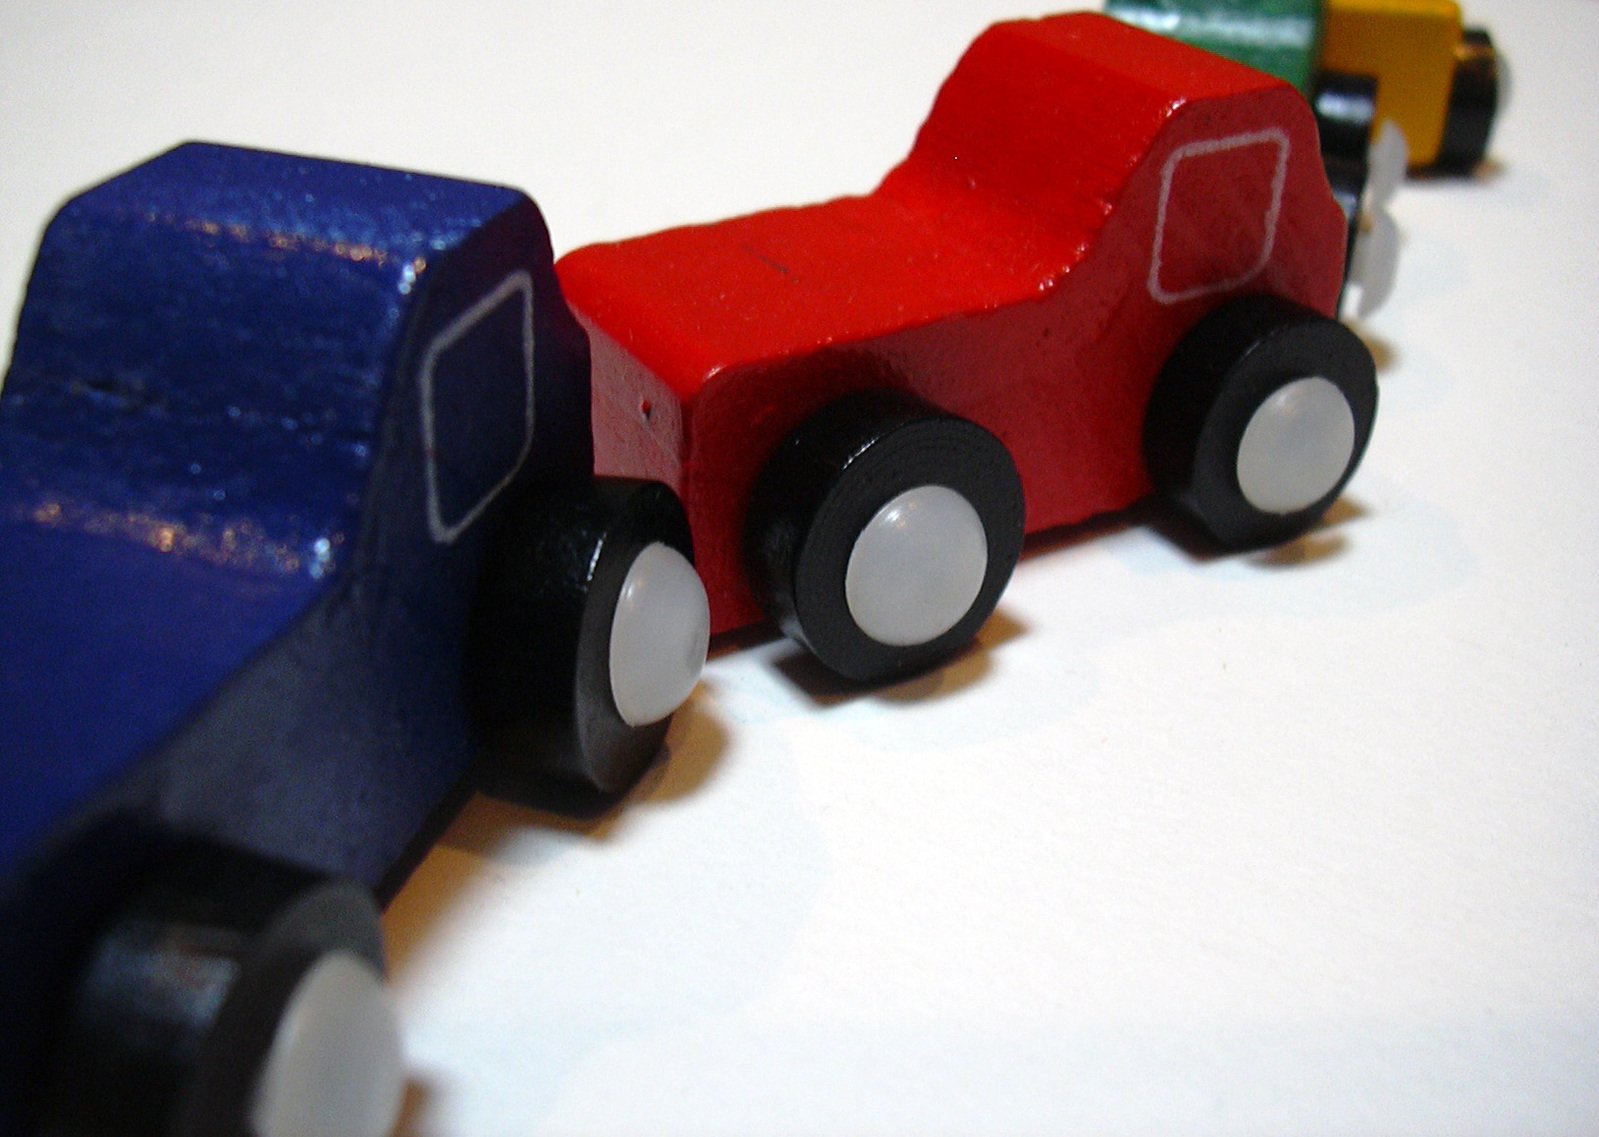 a toy train is painted red, blue and yellow